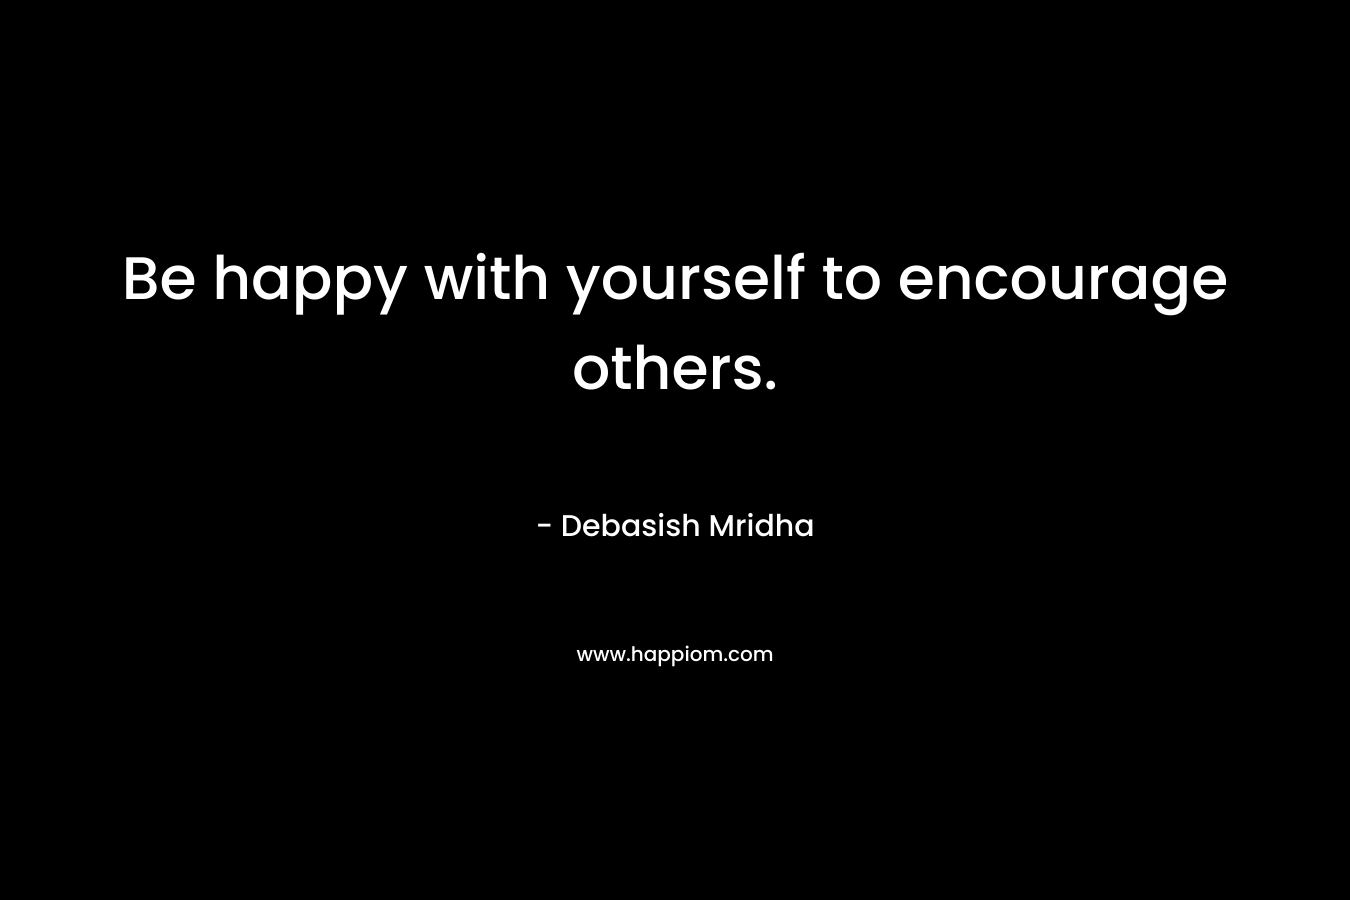 Be happy with yourself to encourage others.